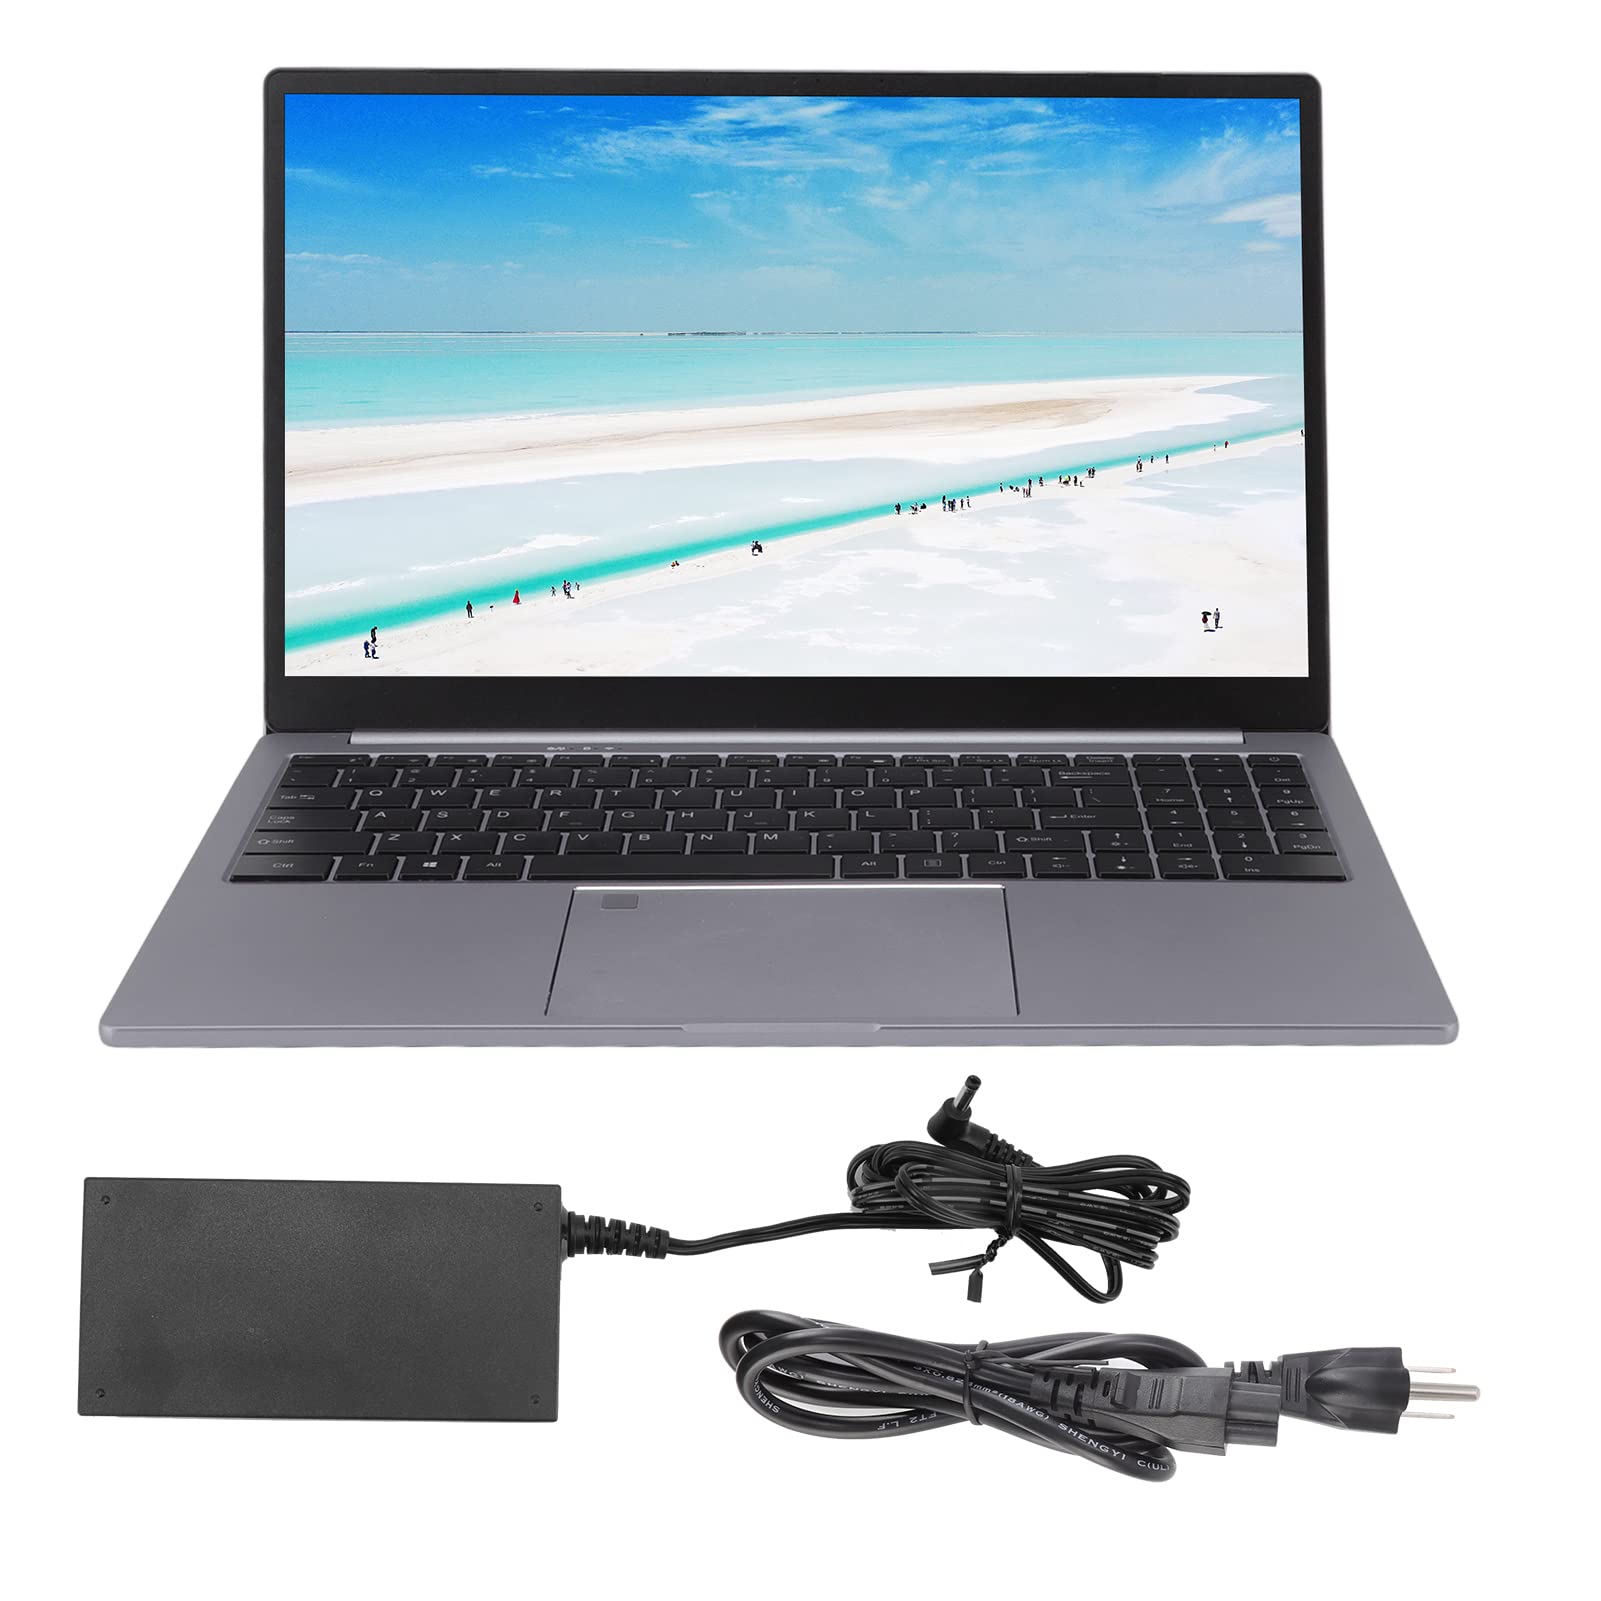 15.5in Laptop, DDR4 2666MHz Space Gray Computer Laptop 15.5in HD IPS Screen for Work US Plug